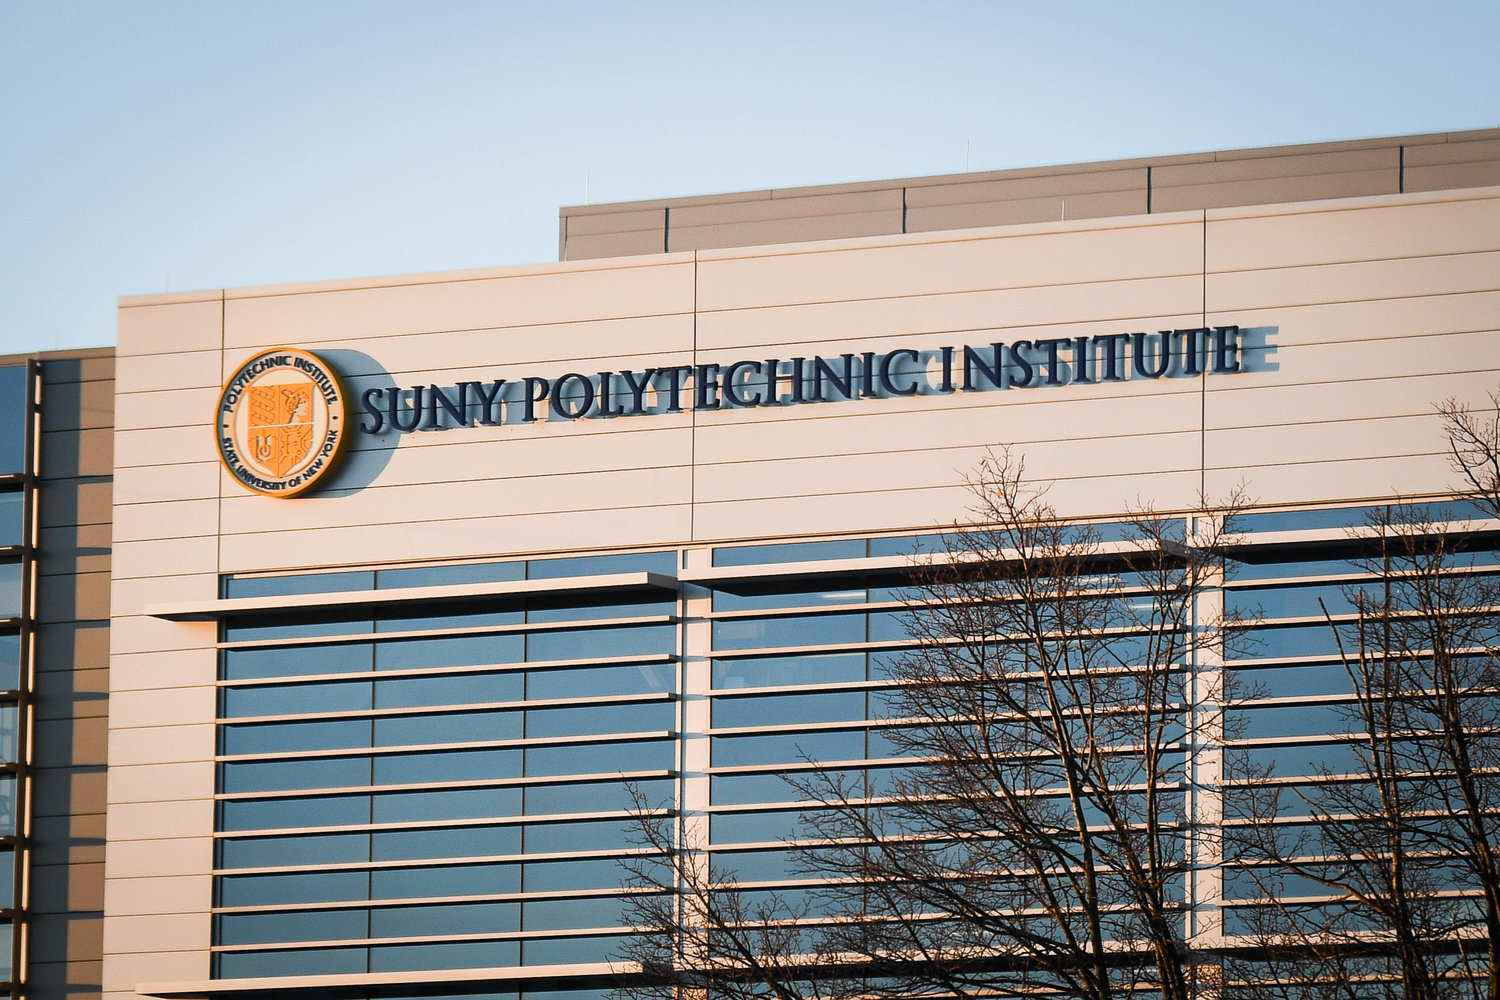 The College of Nanoscale Science and Engineering (CNSE) at SUNY Polytechnic Institute in Marcy will be returning to the University at Albany, following a vote by the SUNY Board of Trustees.